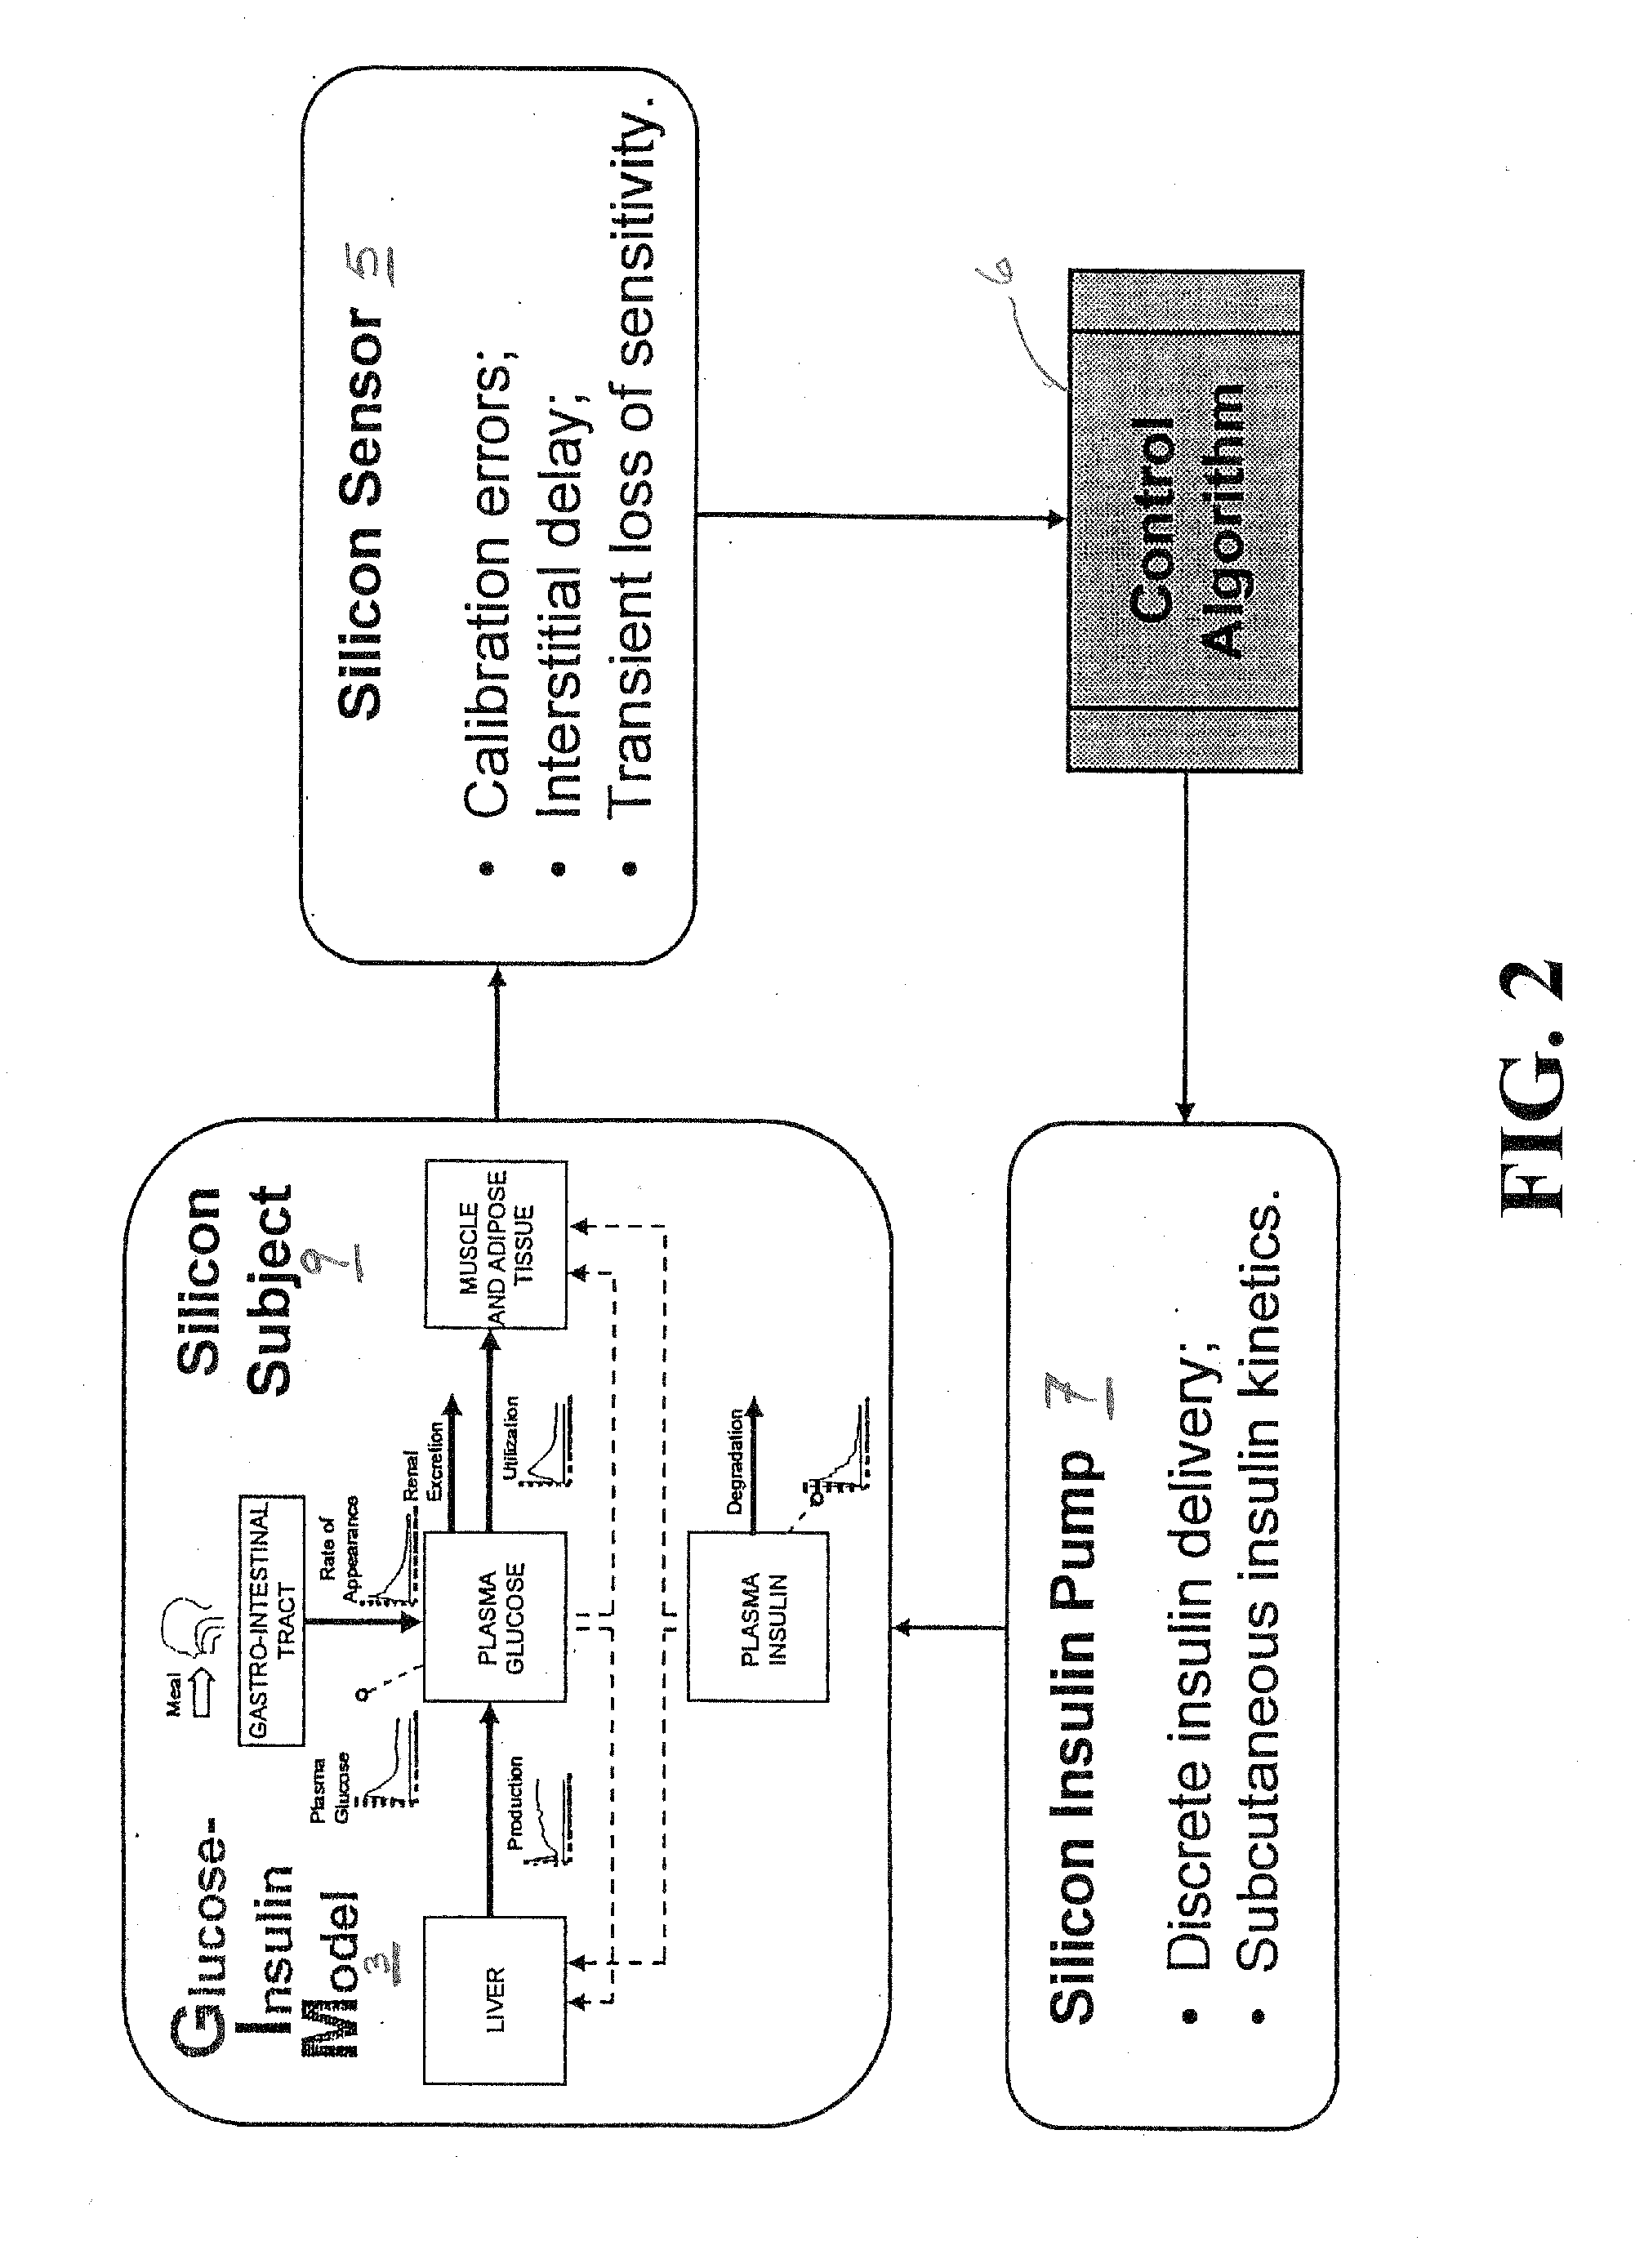 Method, System and Computer Simulation Environment for Testing of Monitoring and Control Strategies in Diabetes